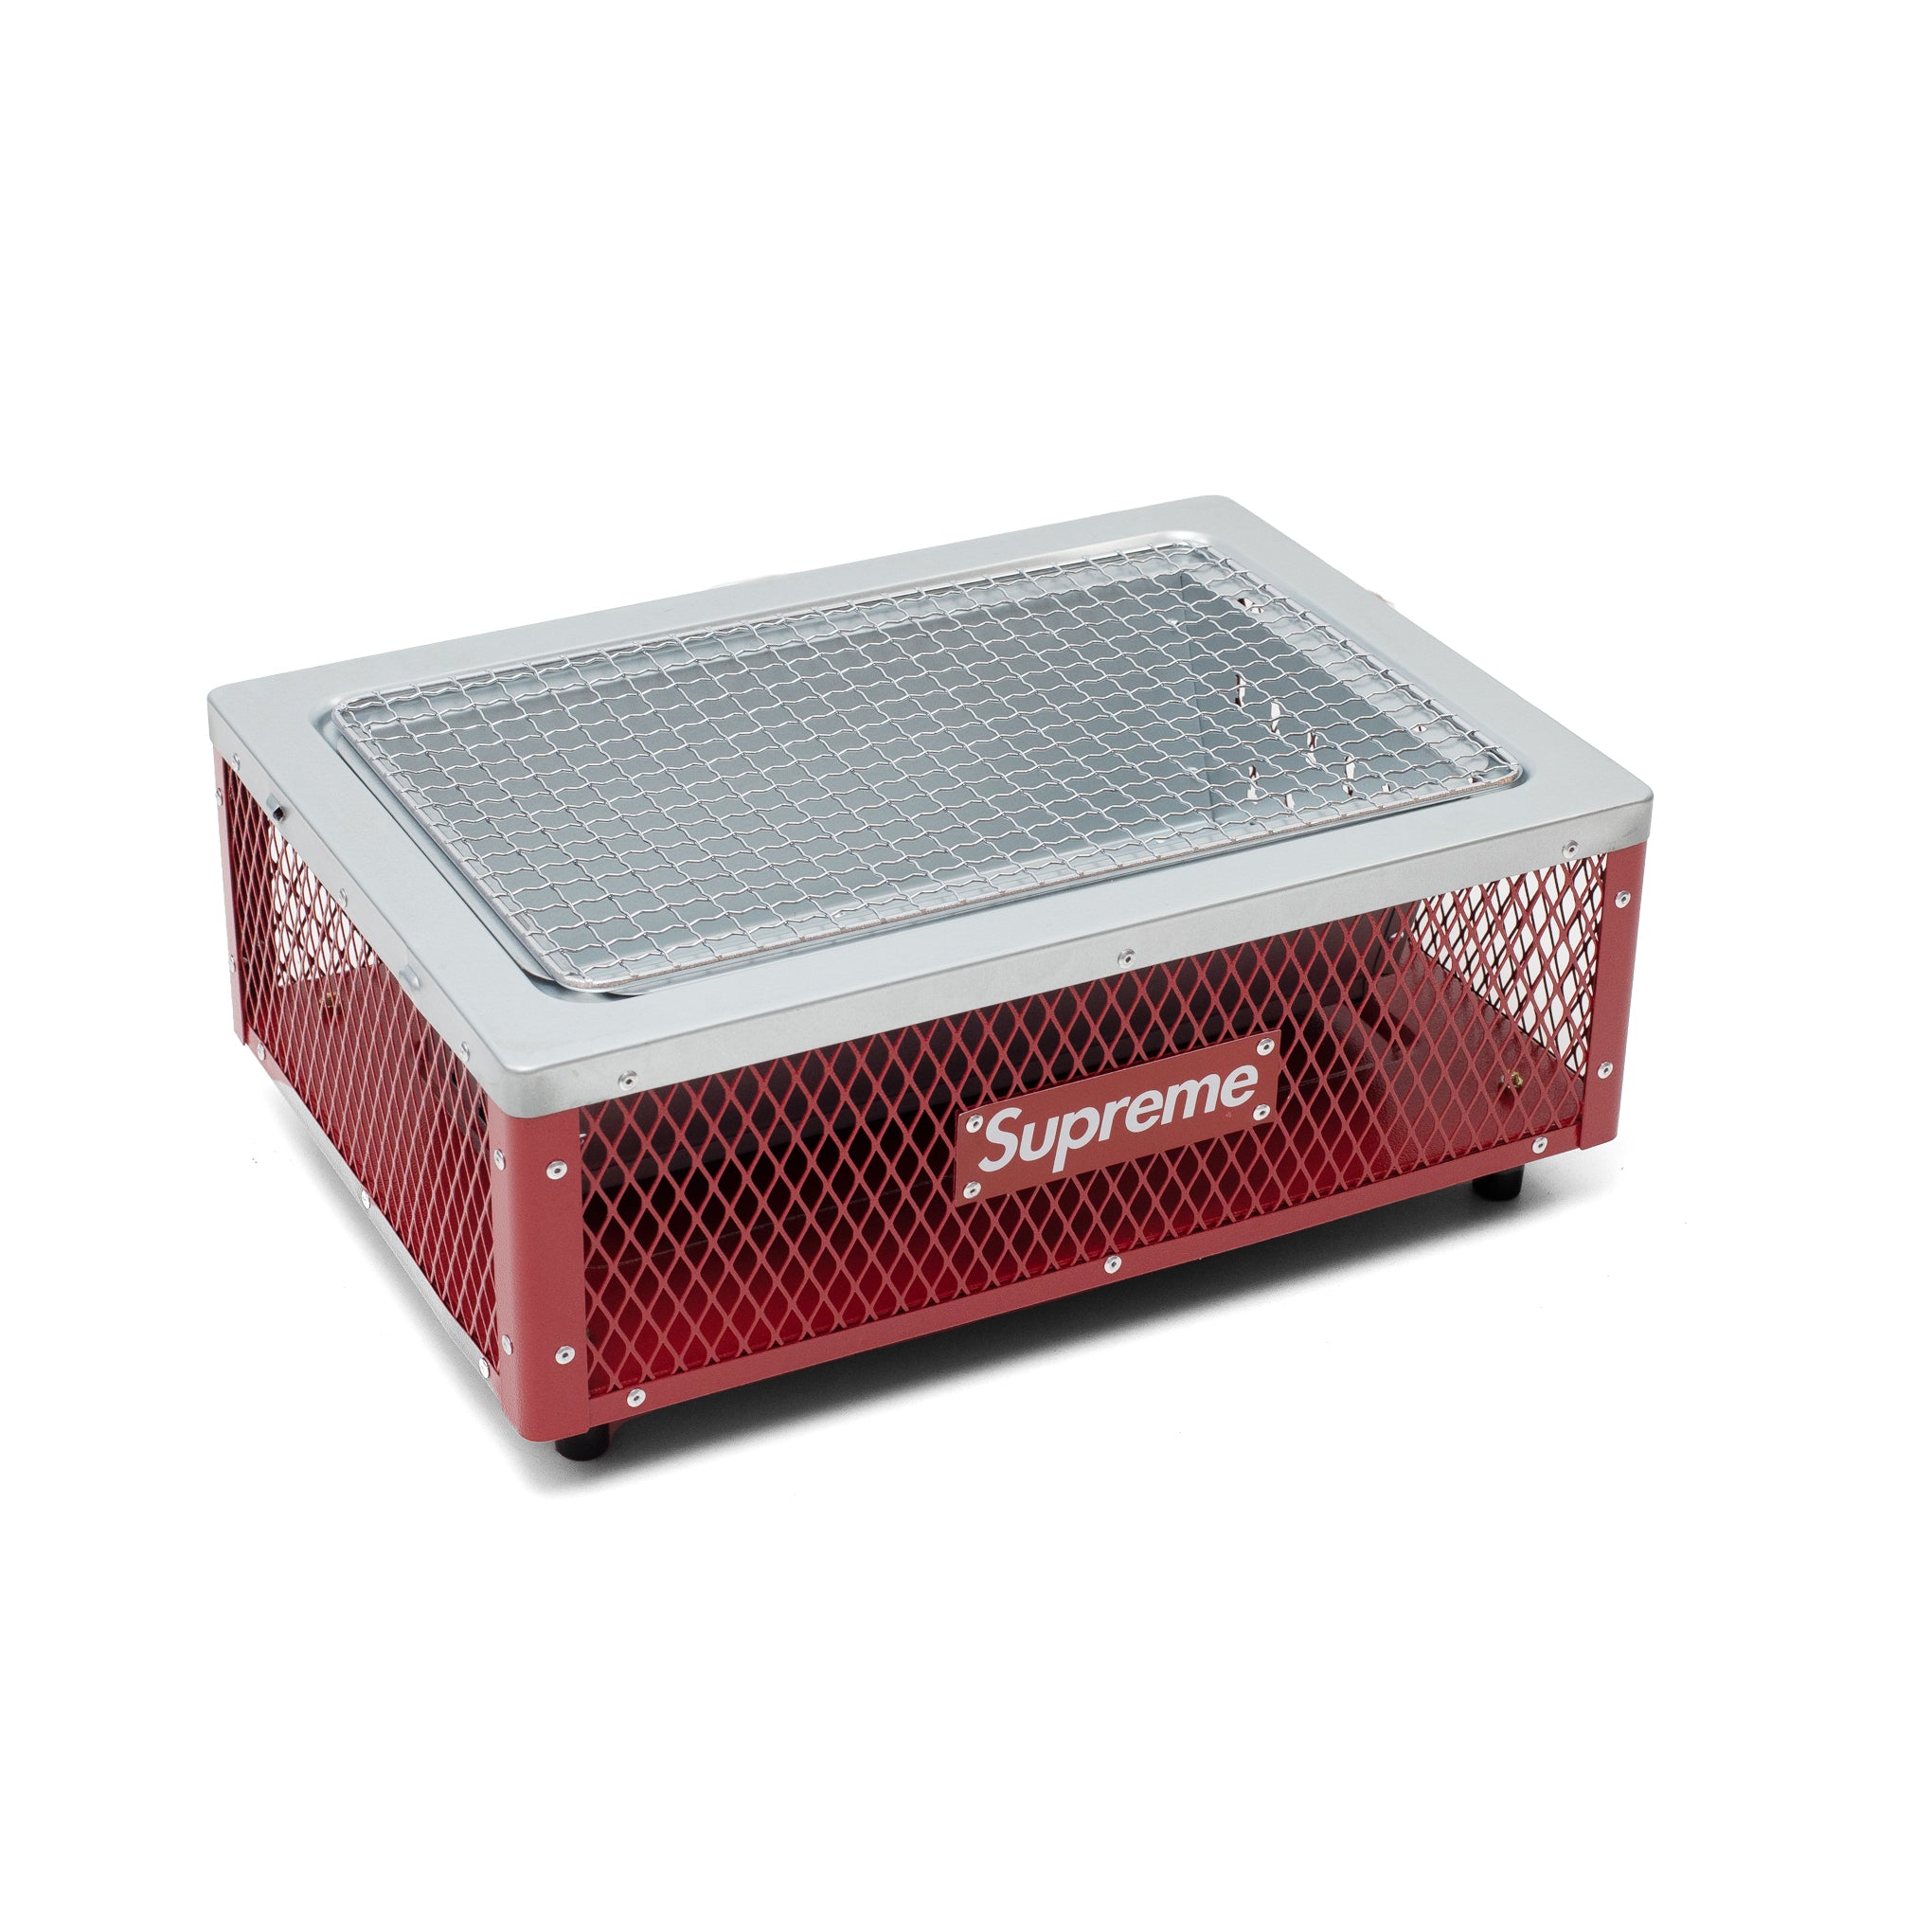 SUPREME COLEMAN CHARCOAL GRILL